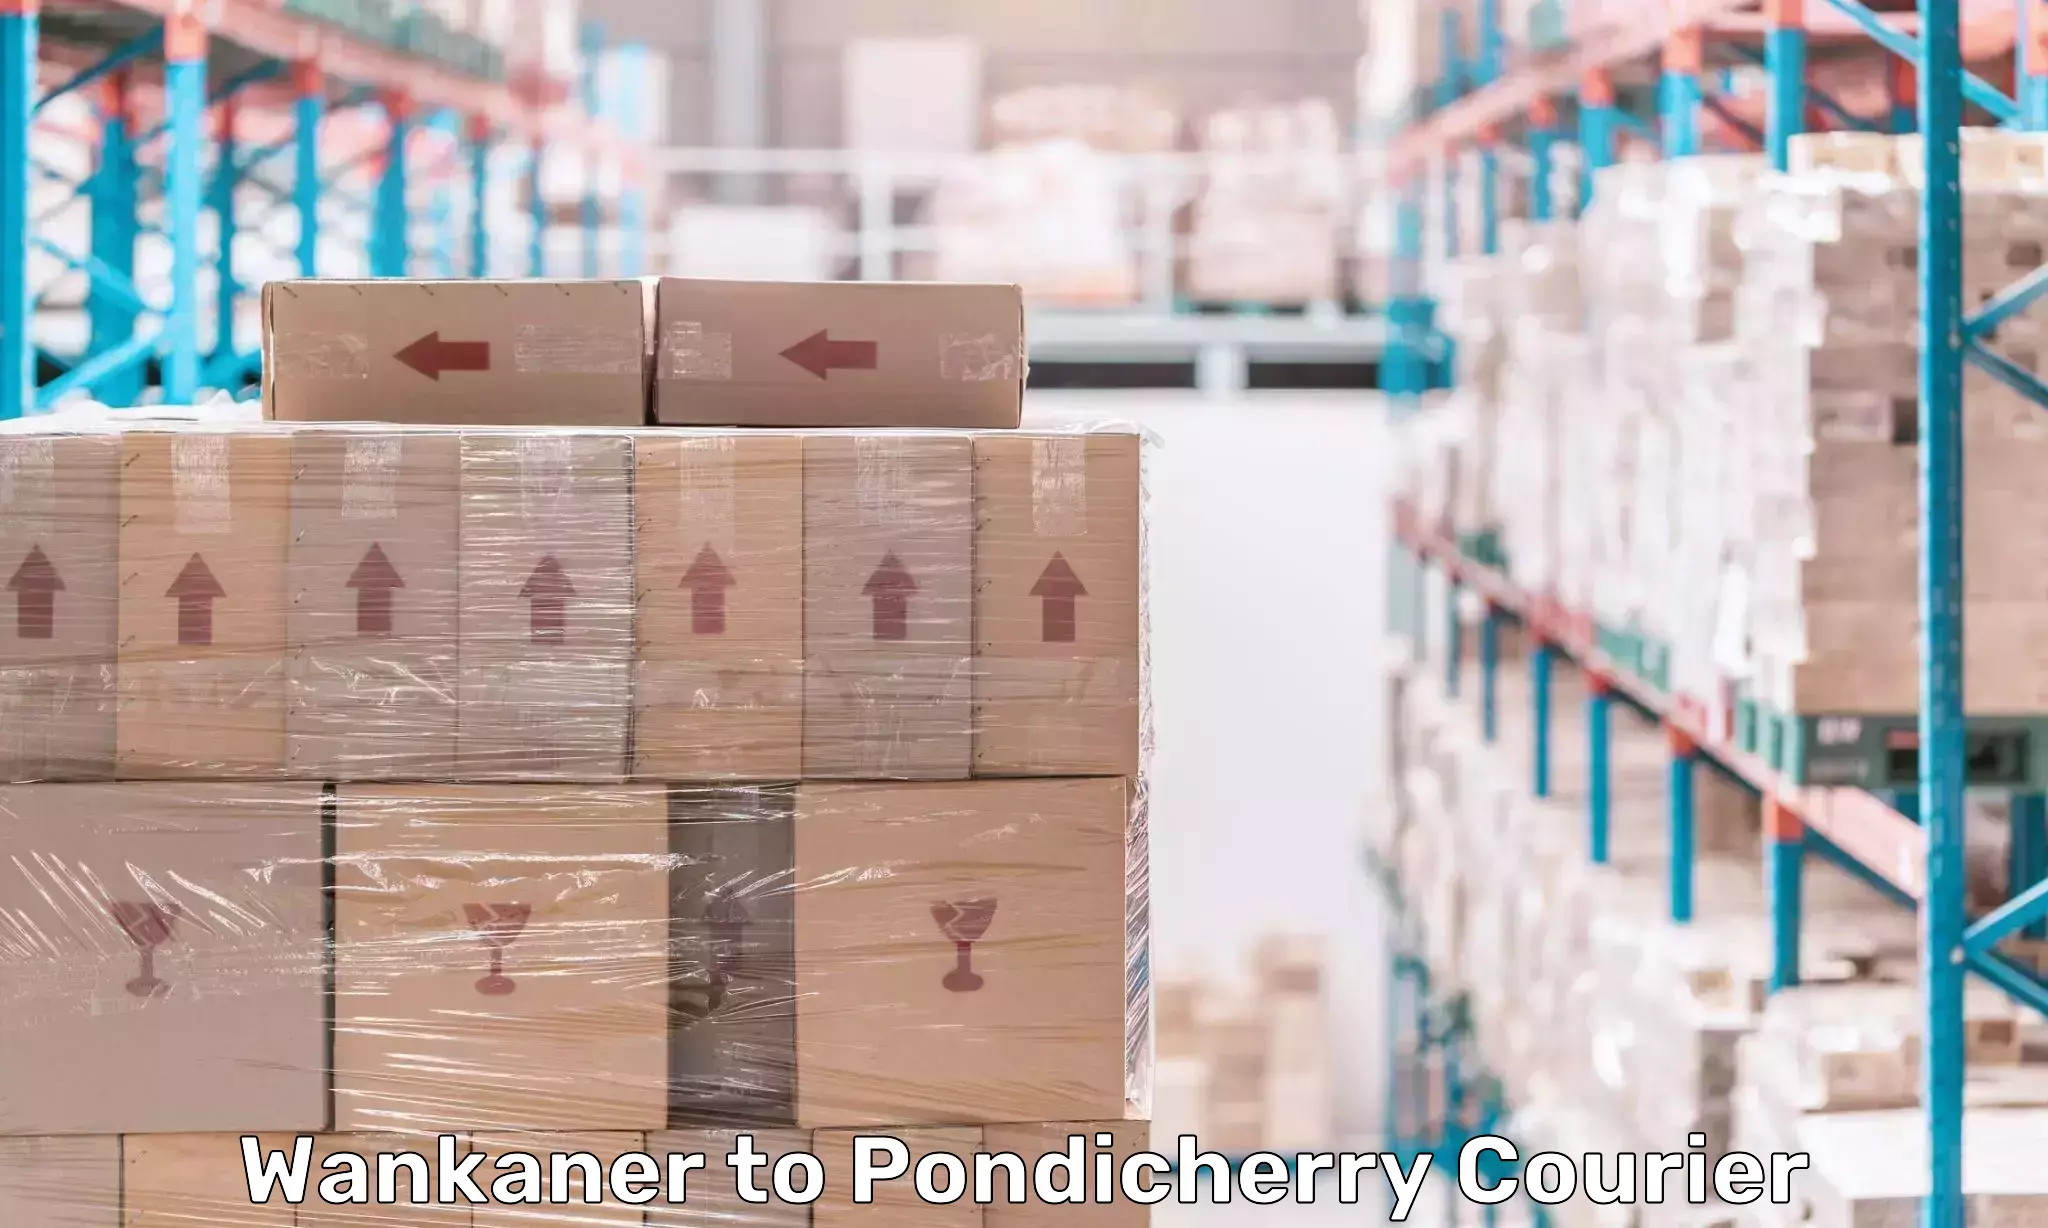 Global courier networks Wankaner to Pondicherry